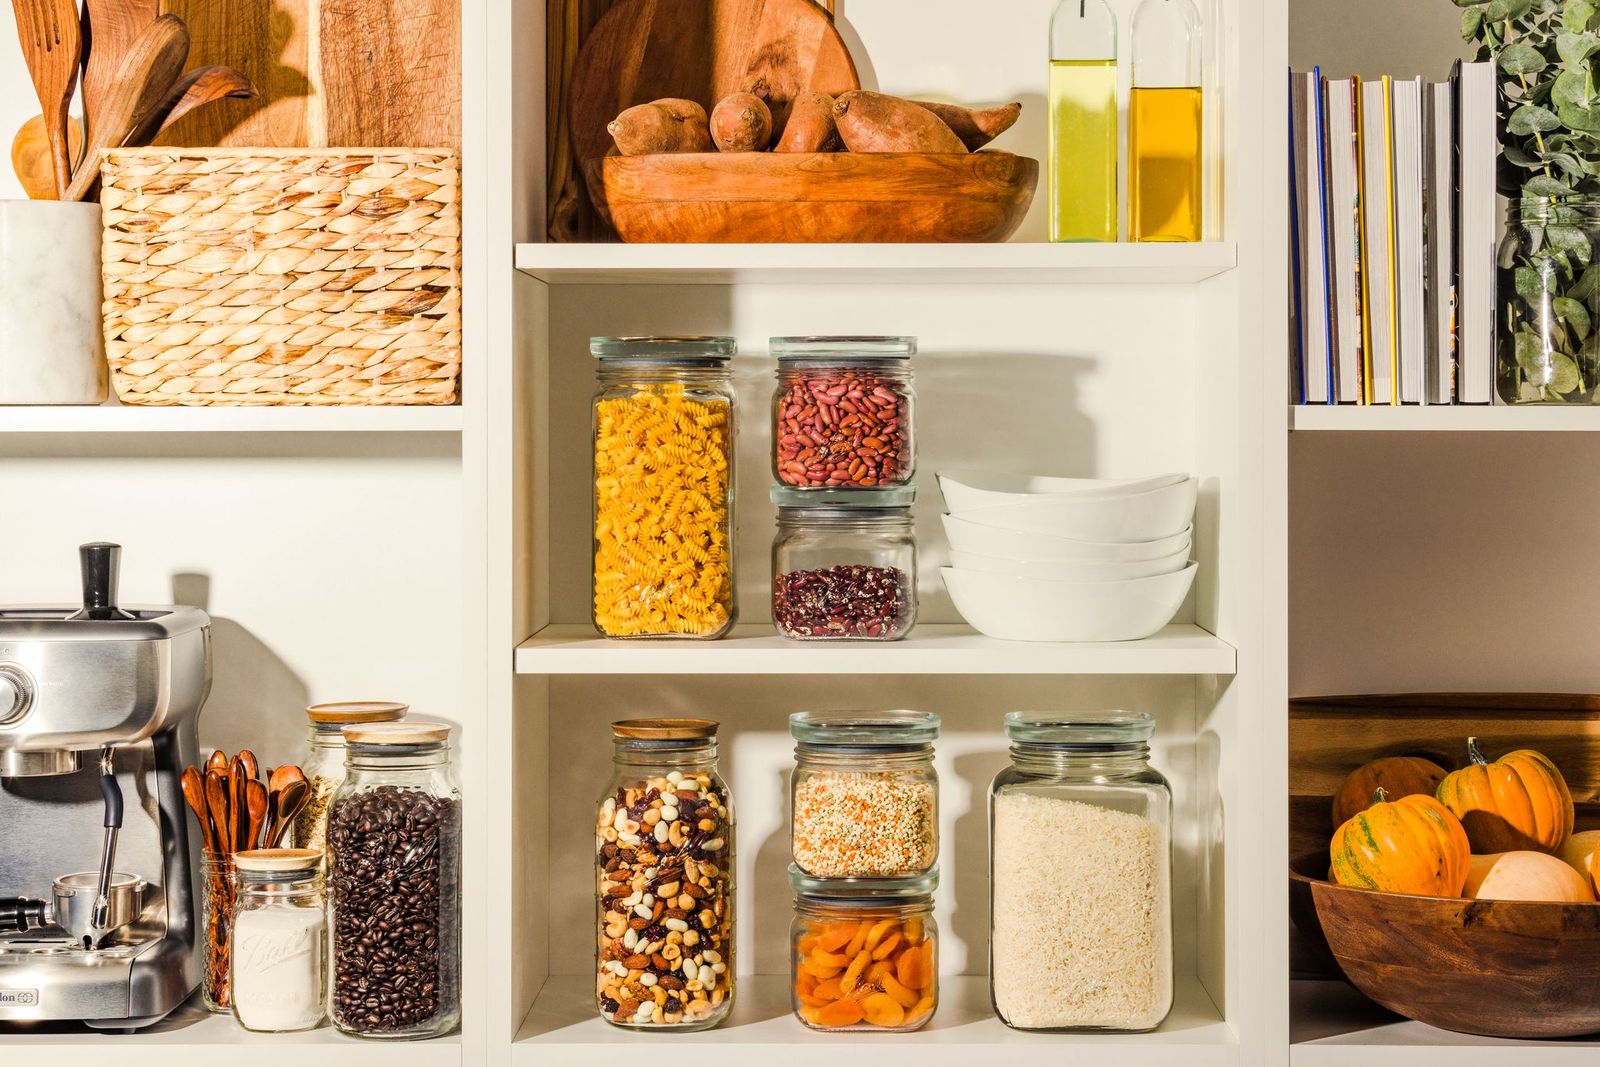 The makers of Ball® home canning products are adding new Ball® Stack & Store Jars to its pantry and storage collection. Ball® Stack & Store Jars are airtight and stackable, providing space-efficient organization for all pantry needs.